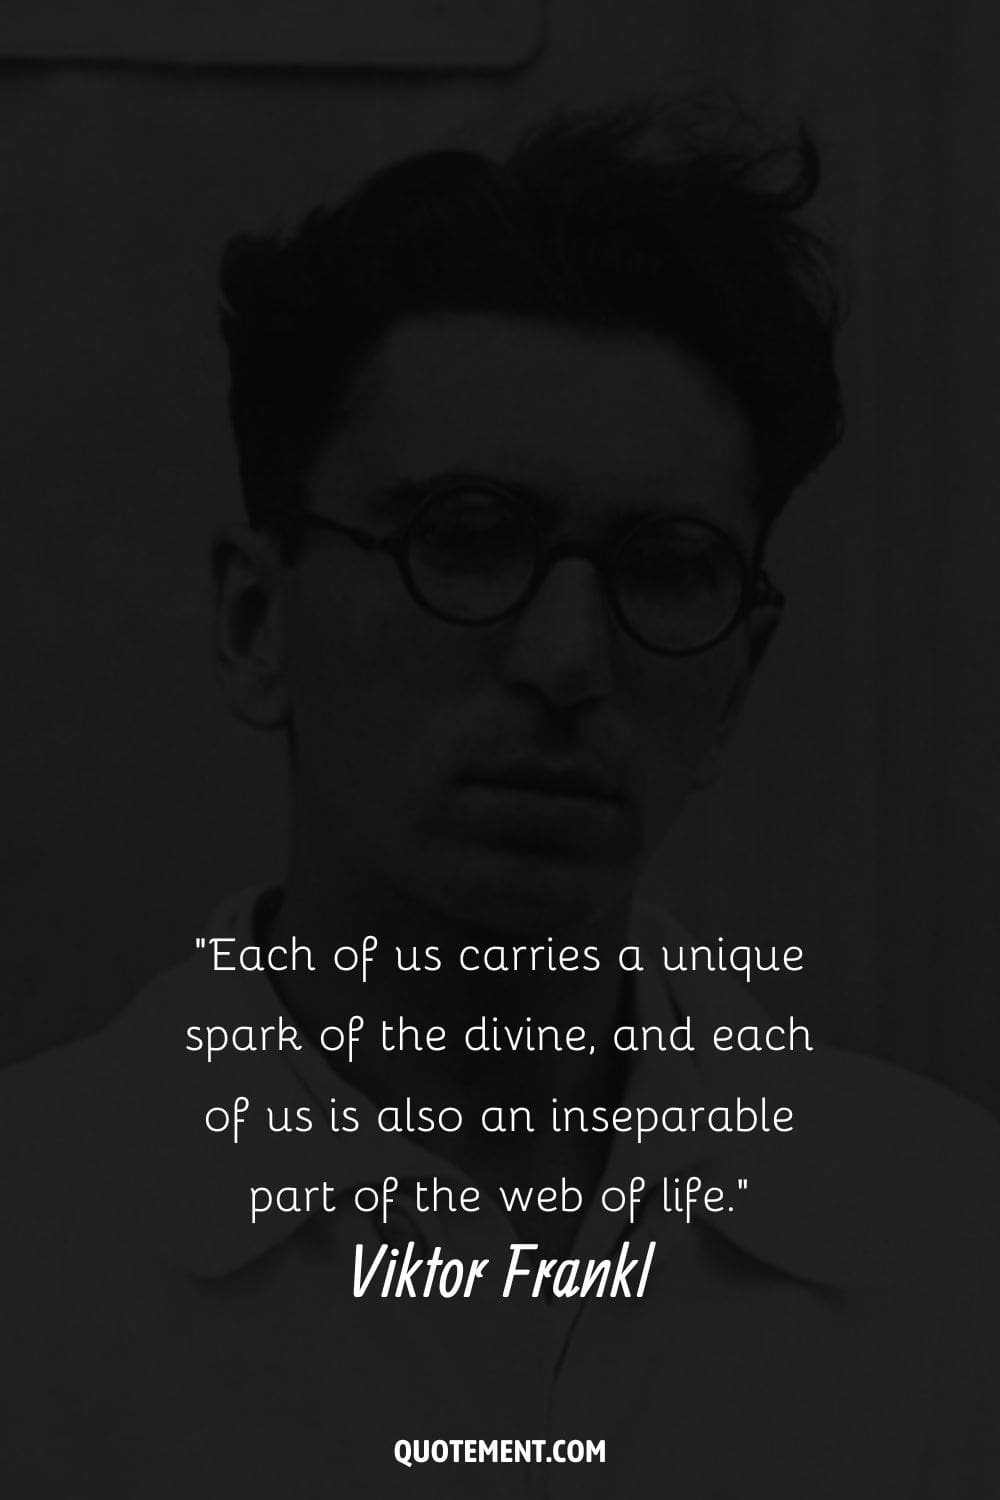 Viktor Frankl wearing white shirt and glasses representing his quote divine spark.